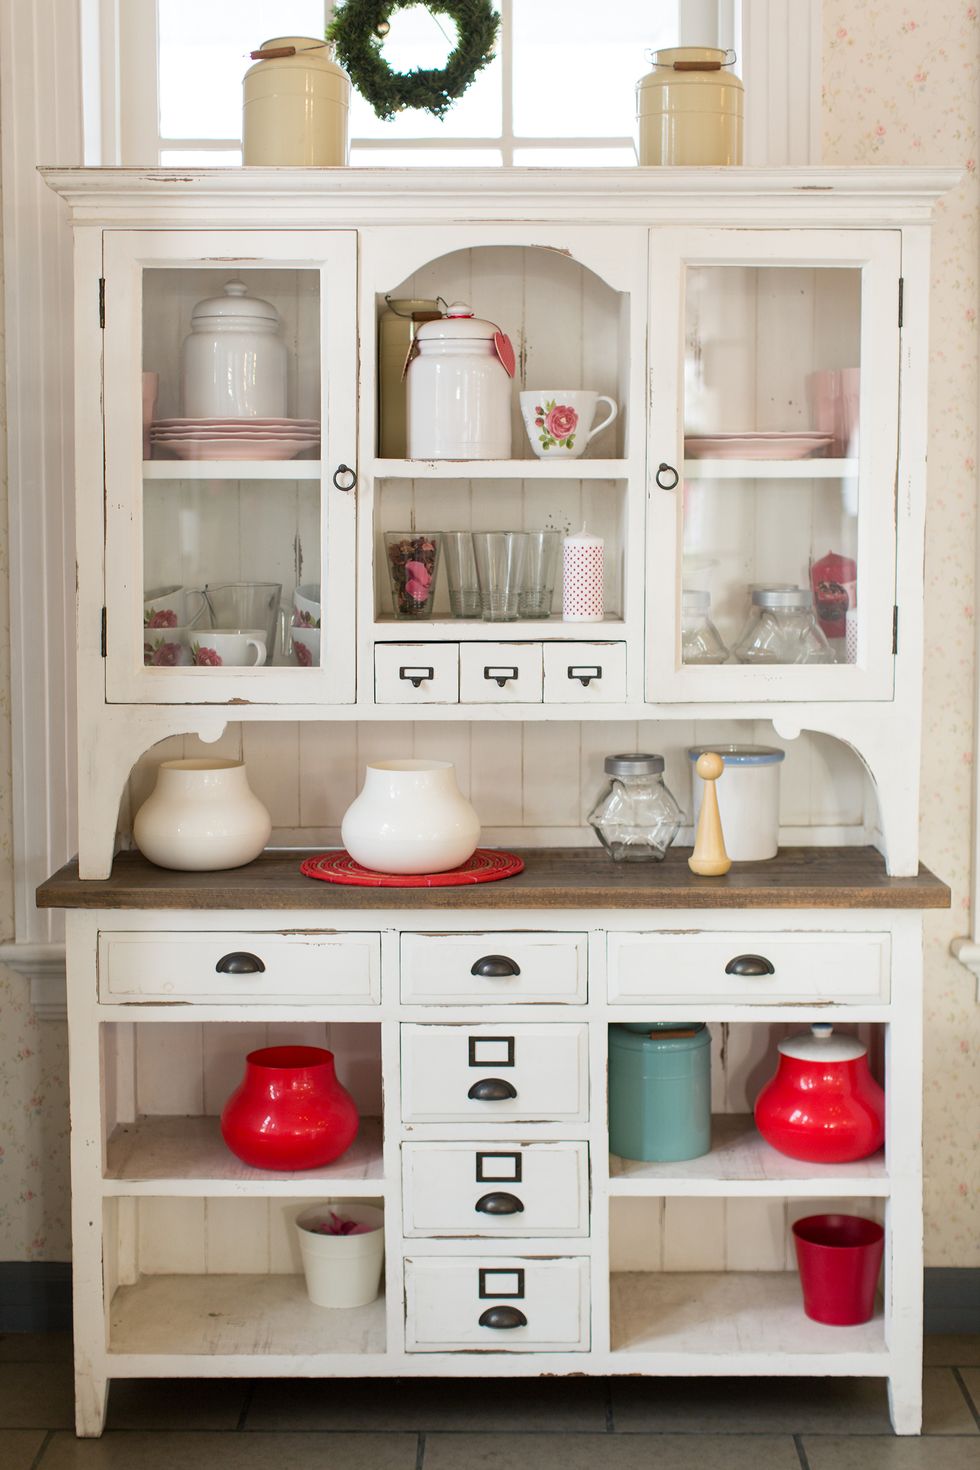 https://hips.hearstapps.com/hmg-prod/images/how-to-organize-kitchen-cabinets-hutch-6584936a61fbe.jpg?crop=1xw:1xh;center,top&resize=980:*